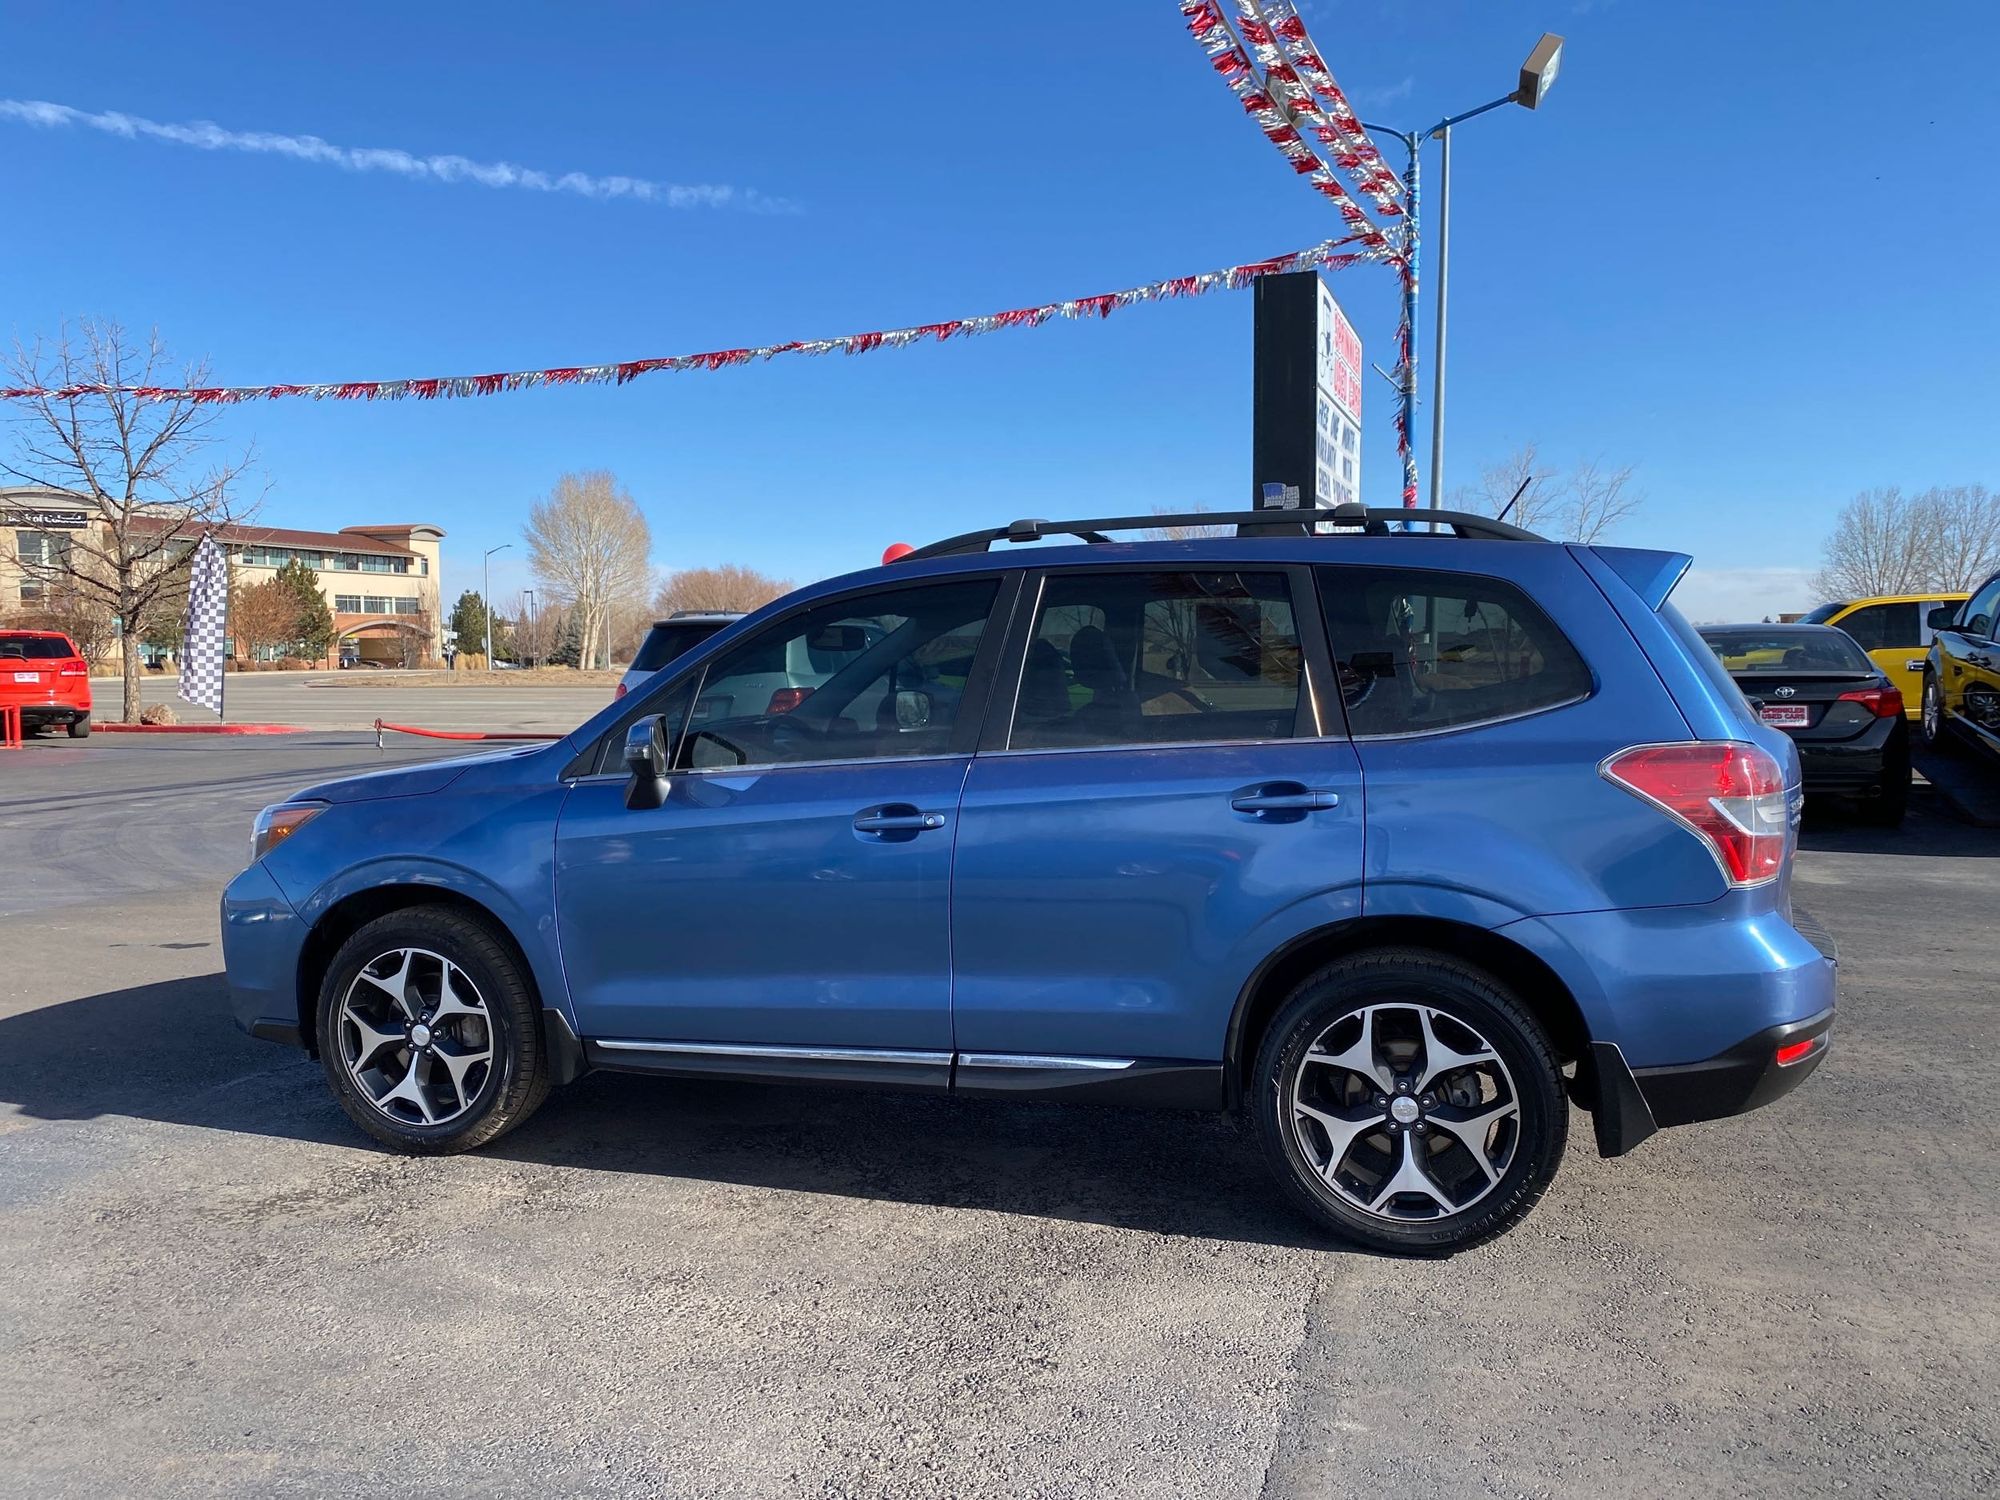 2015 Subaru Forester 2.0XT Touring | Sprinkler Used Cars